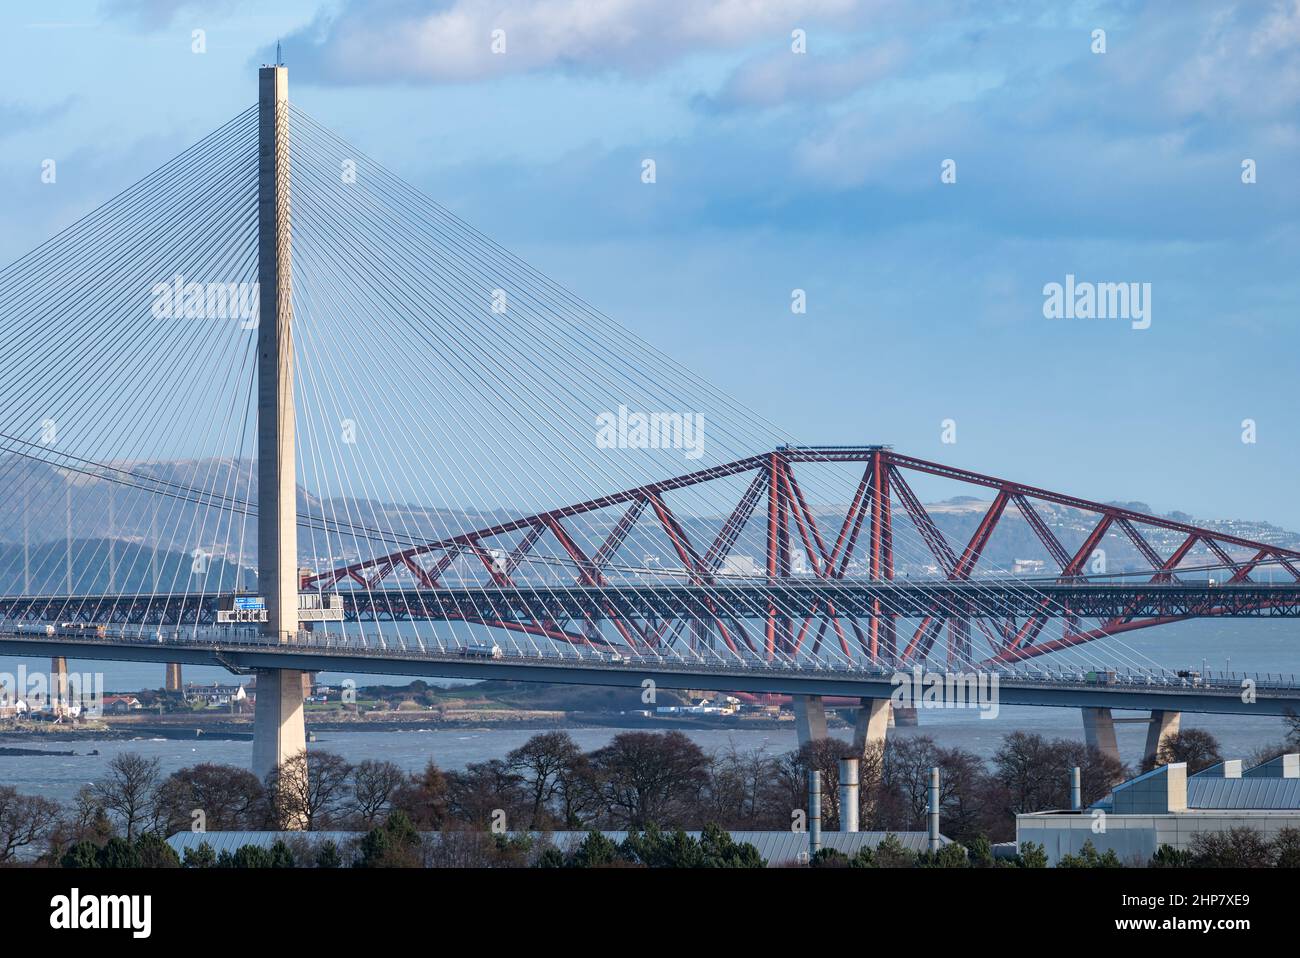 View of Queensferry Crossing and Forth Rail bridges across the Firth of Forth in sunshine, Scotland, UK Stock Photo